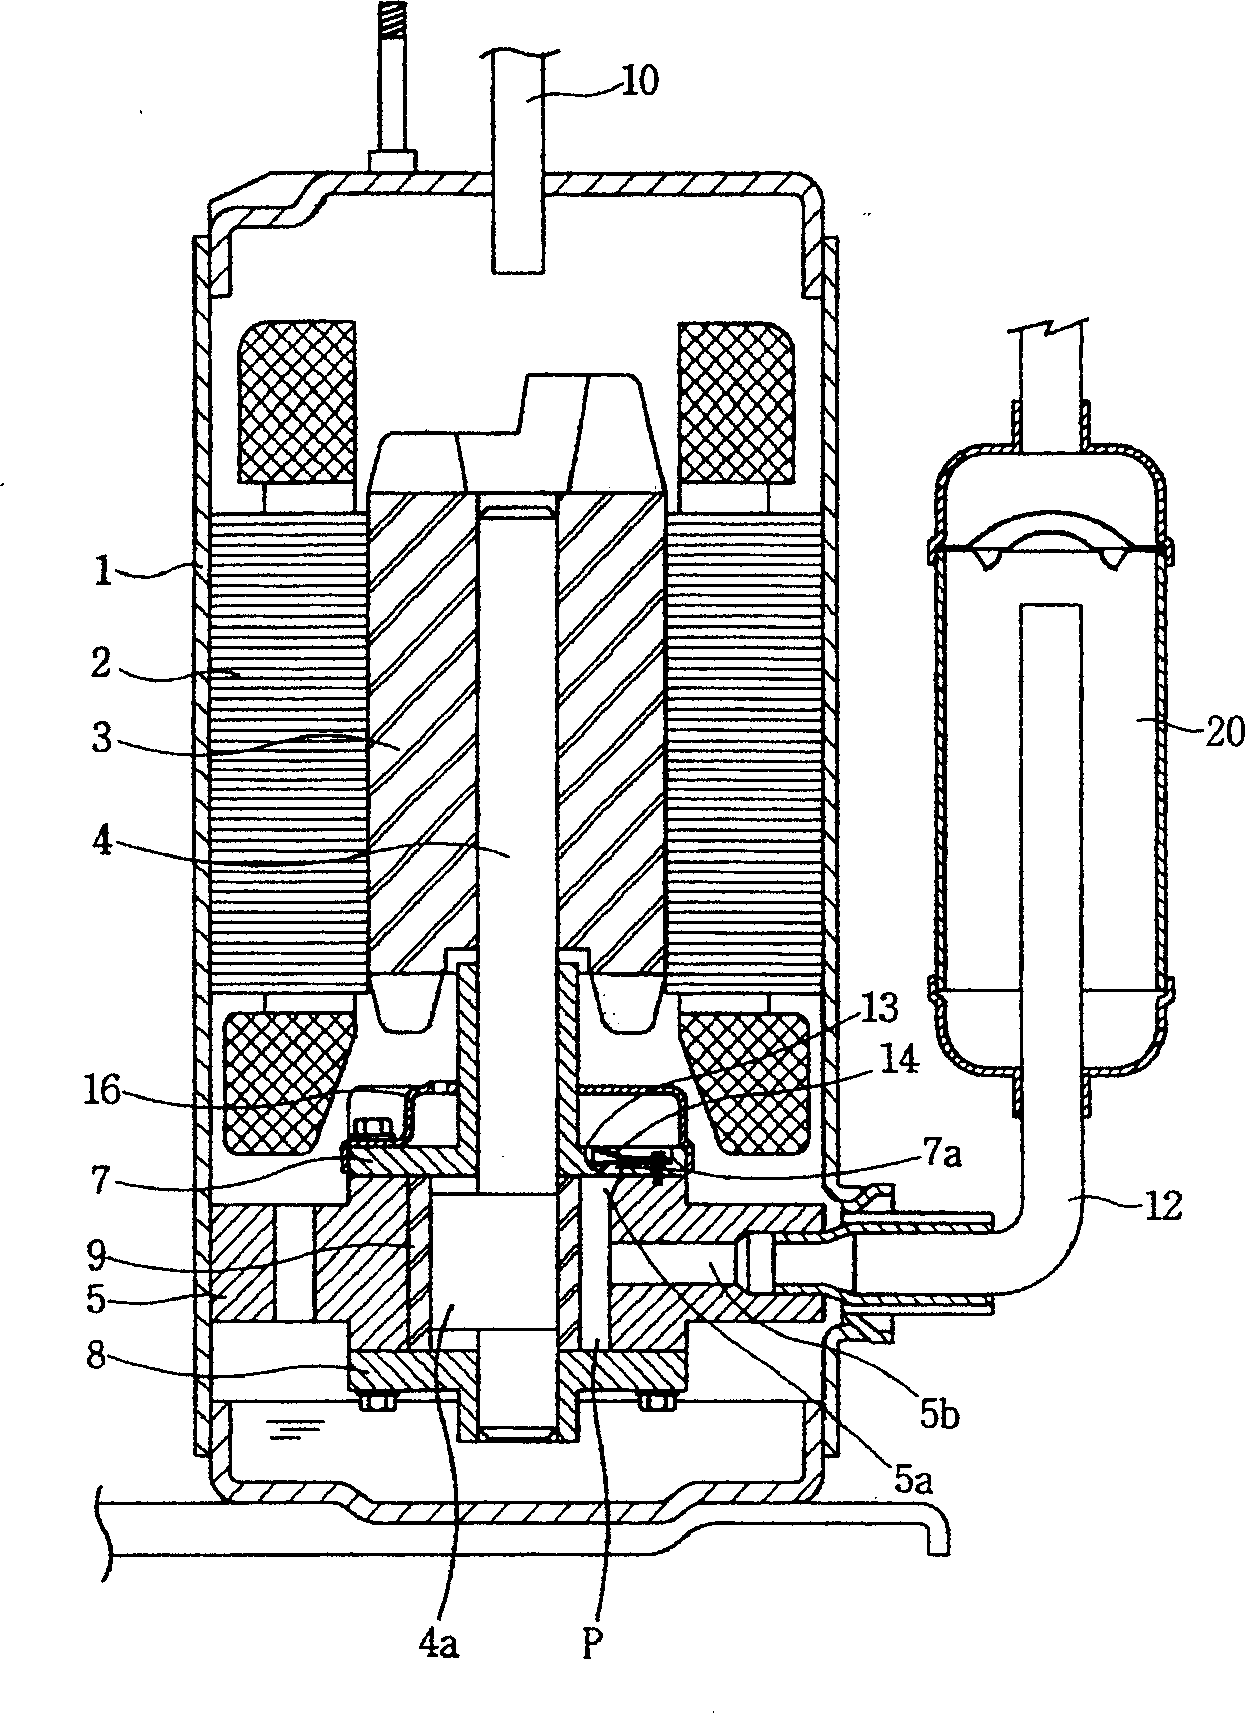 Structure for lowering load of rotary compressor